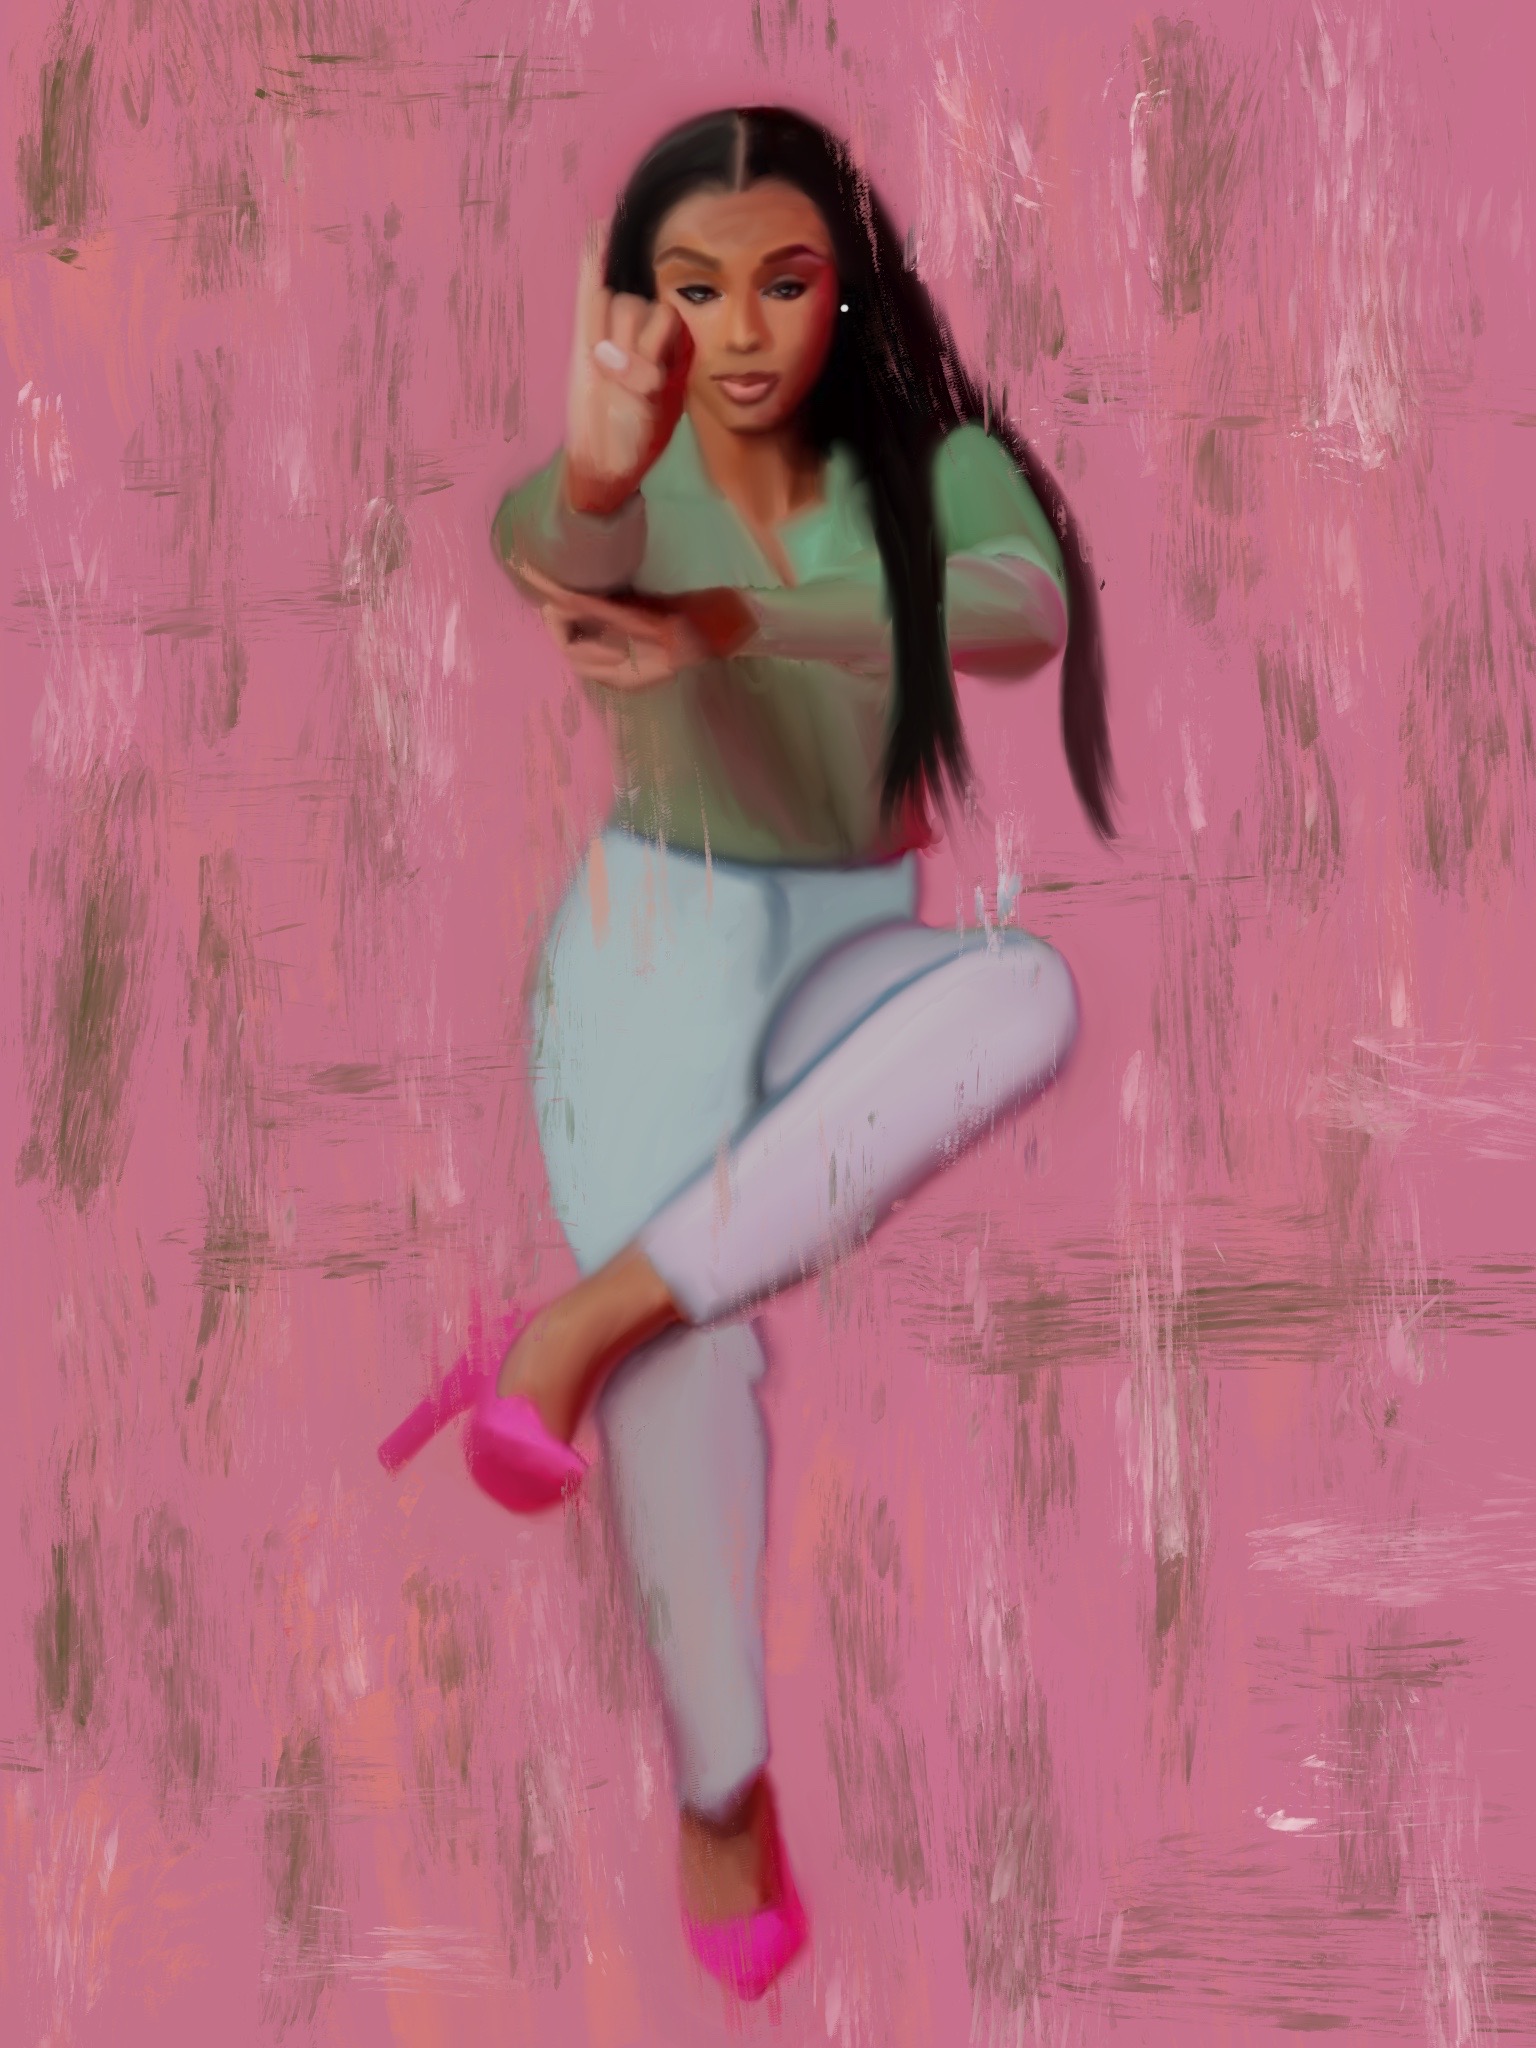 Lady in pink background, representing Alpha Kappa Alpha Sorority, Inc.